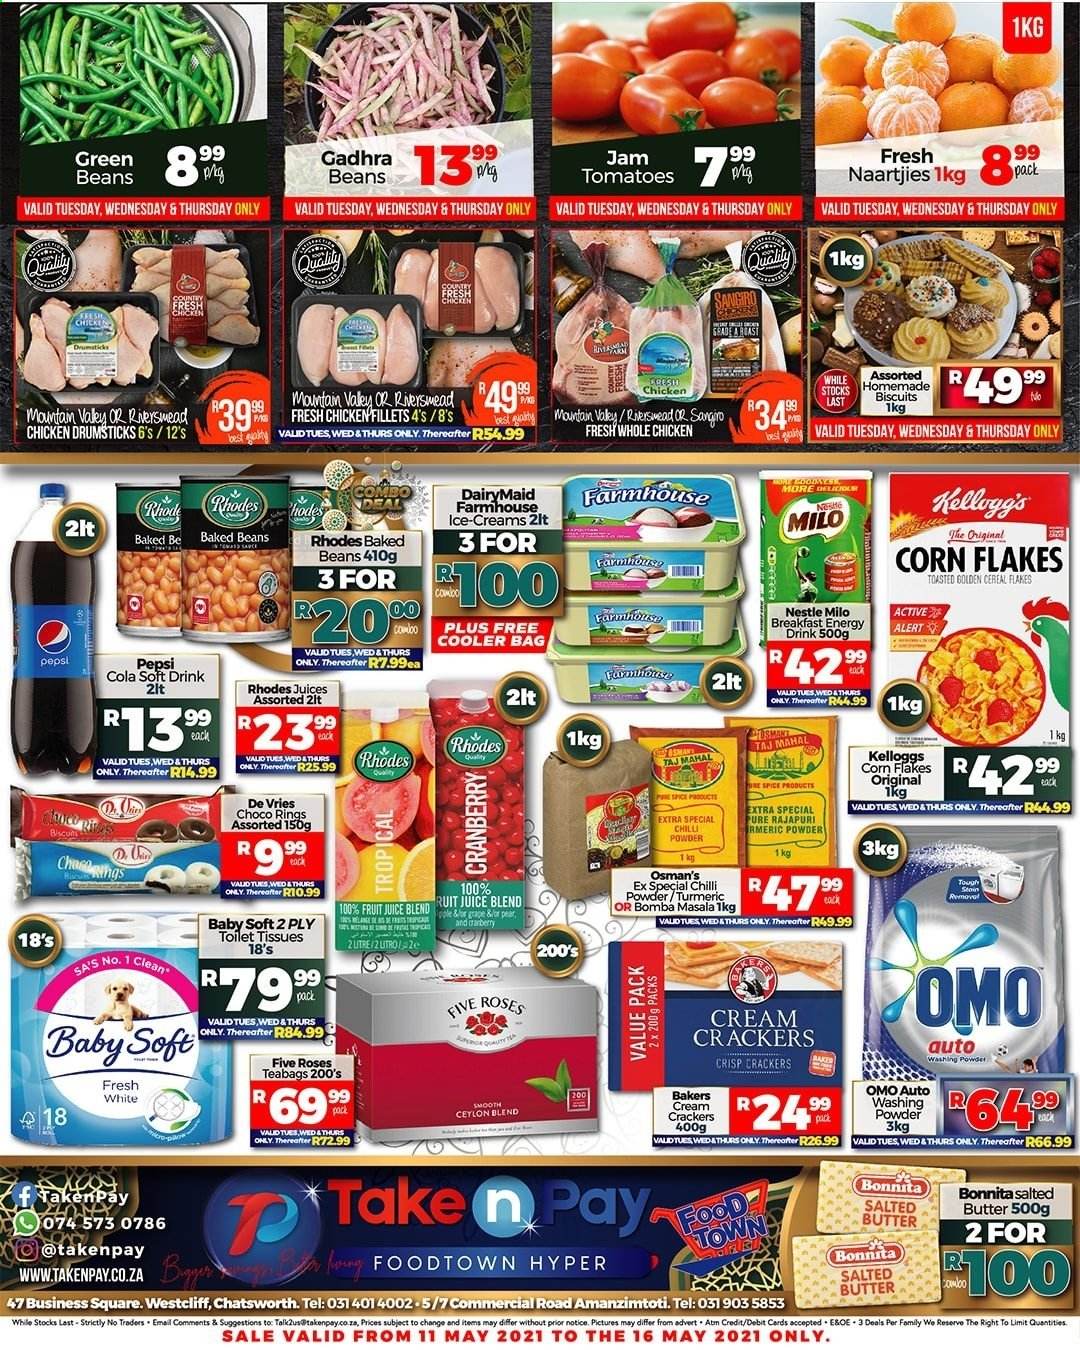 Take n Pay specials - 05.11.2021 - 05.16.2021. 